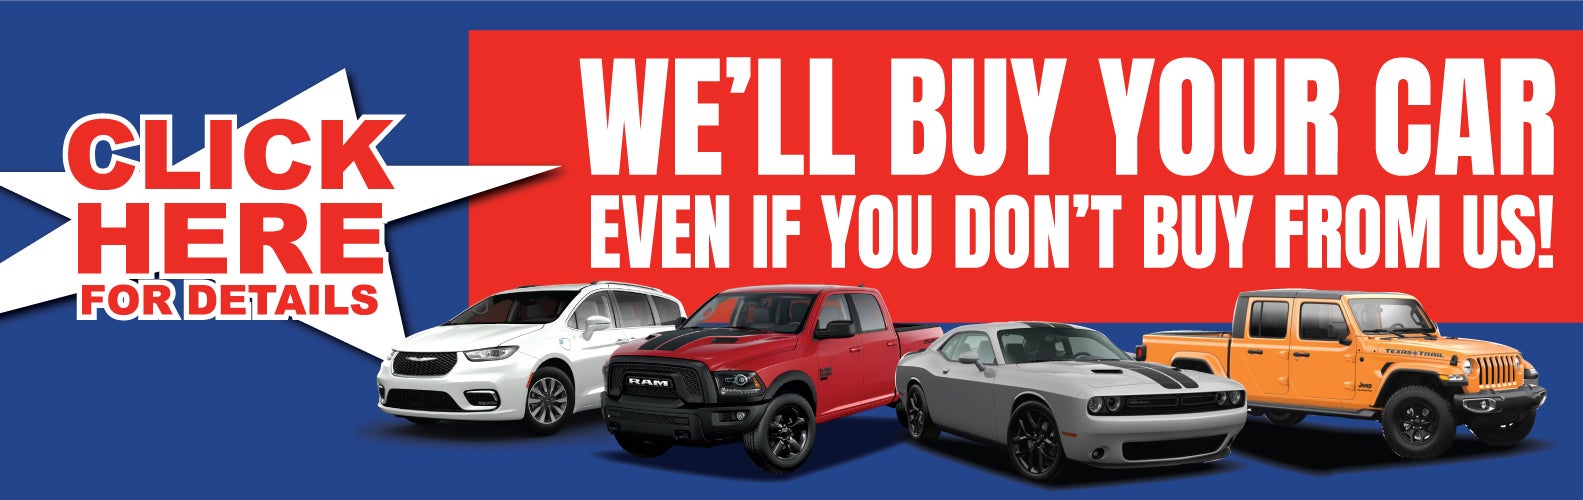 WE'LL BUY YOUR CAR EVEN IF YOU DON;T BUY FROM US!